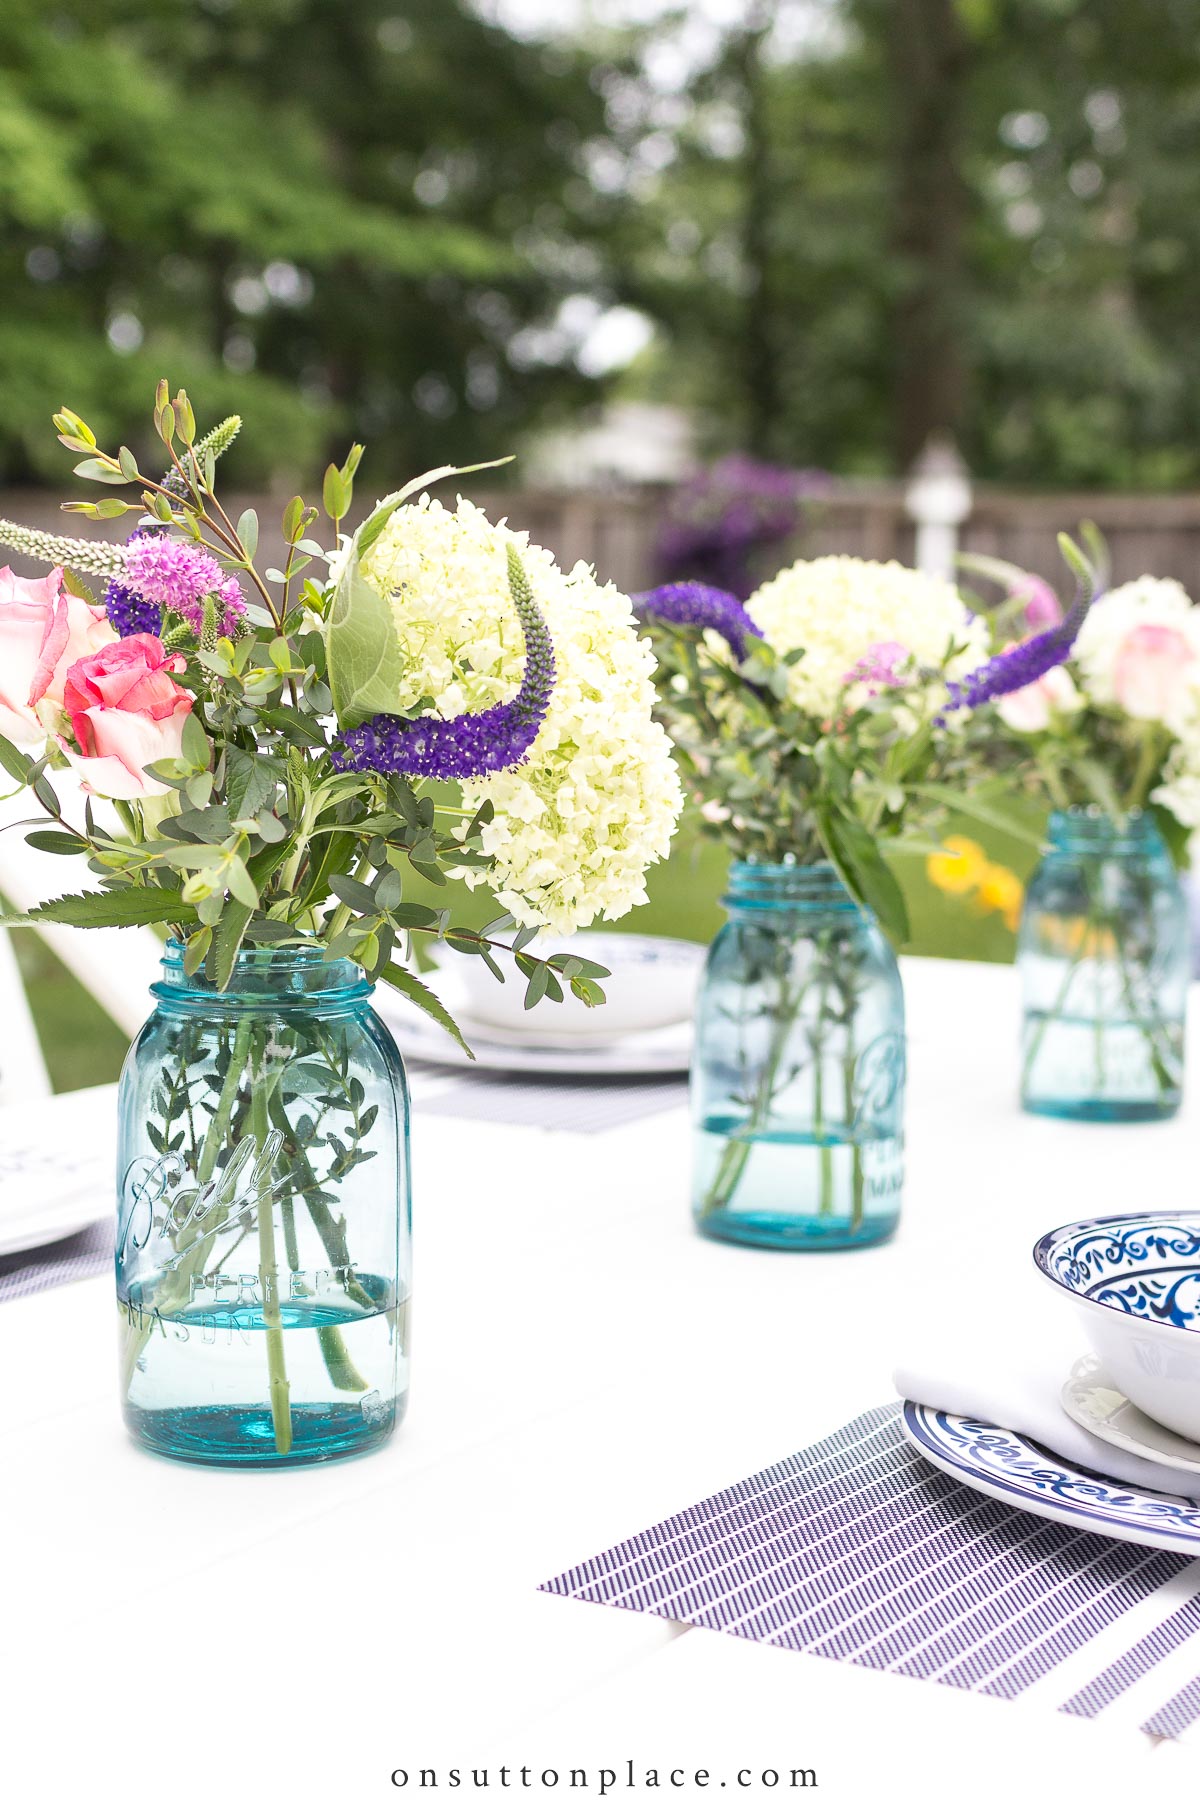 https://www.onsuttonplace.com/wp-content/uploads/2019/02/row-of-blue-mason-jars-on-outdoor-table-2022.jpg